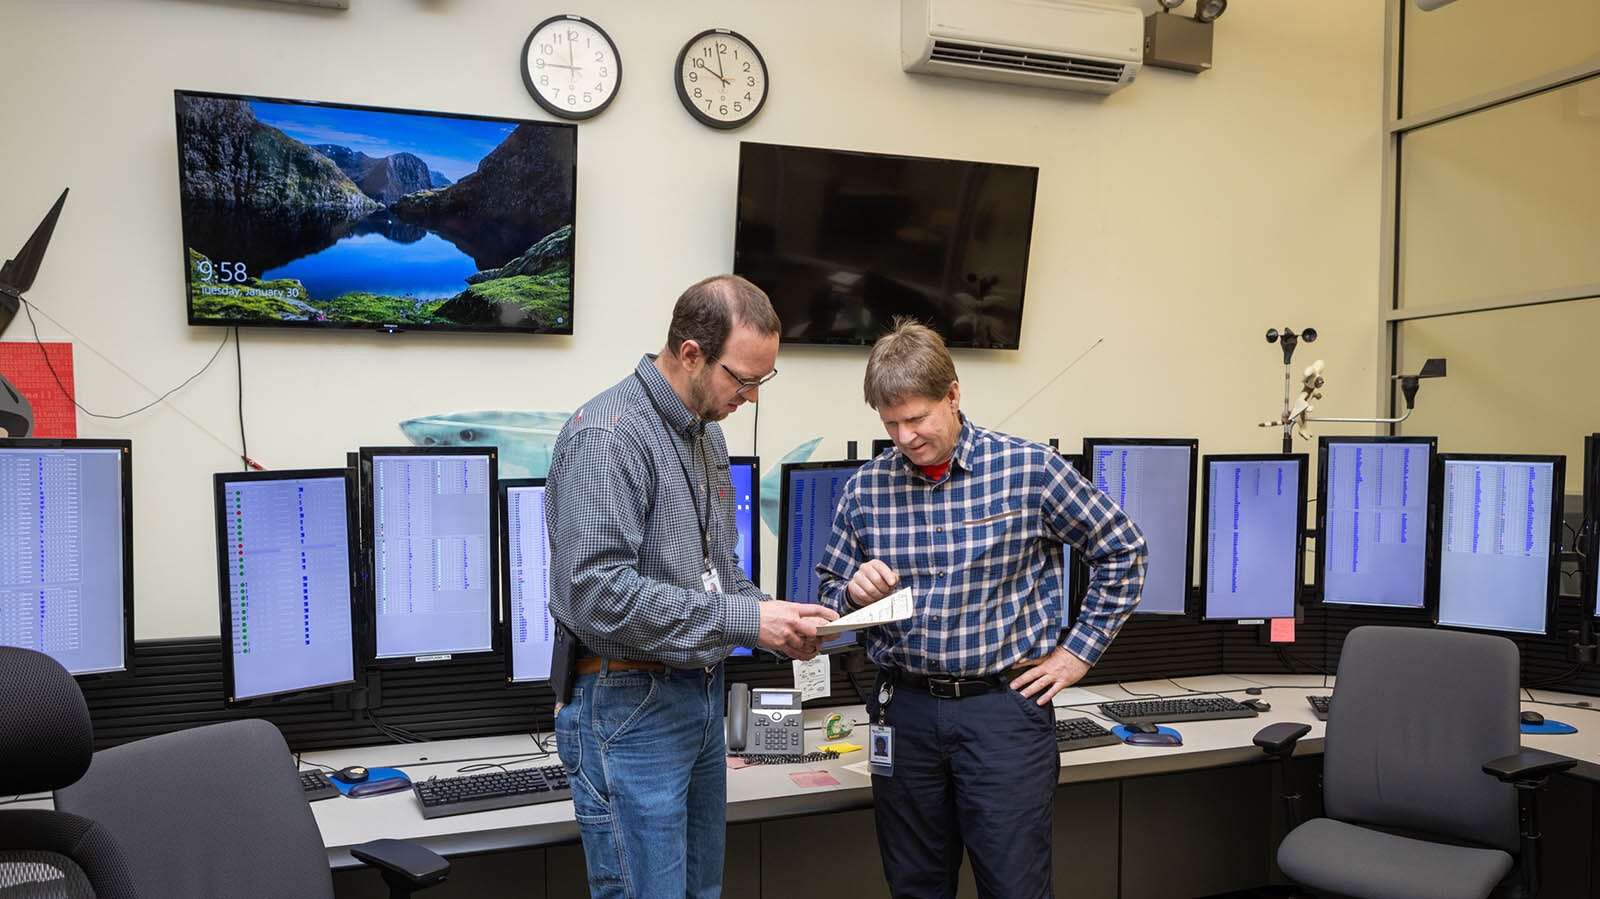 Devin Hutchinson, left, and Laine Anderson review a wind farm map in "the fishbowl" at PacifiCorp's wind turbine Mission Control center in Casper.